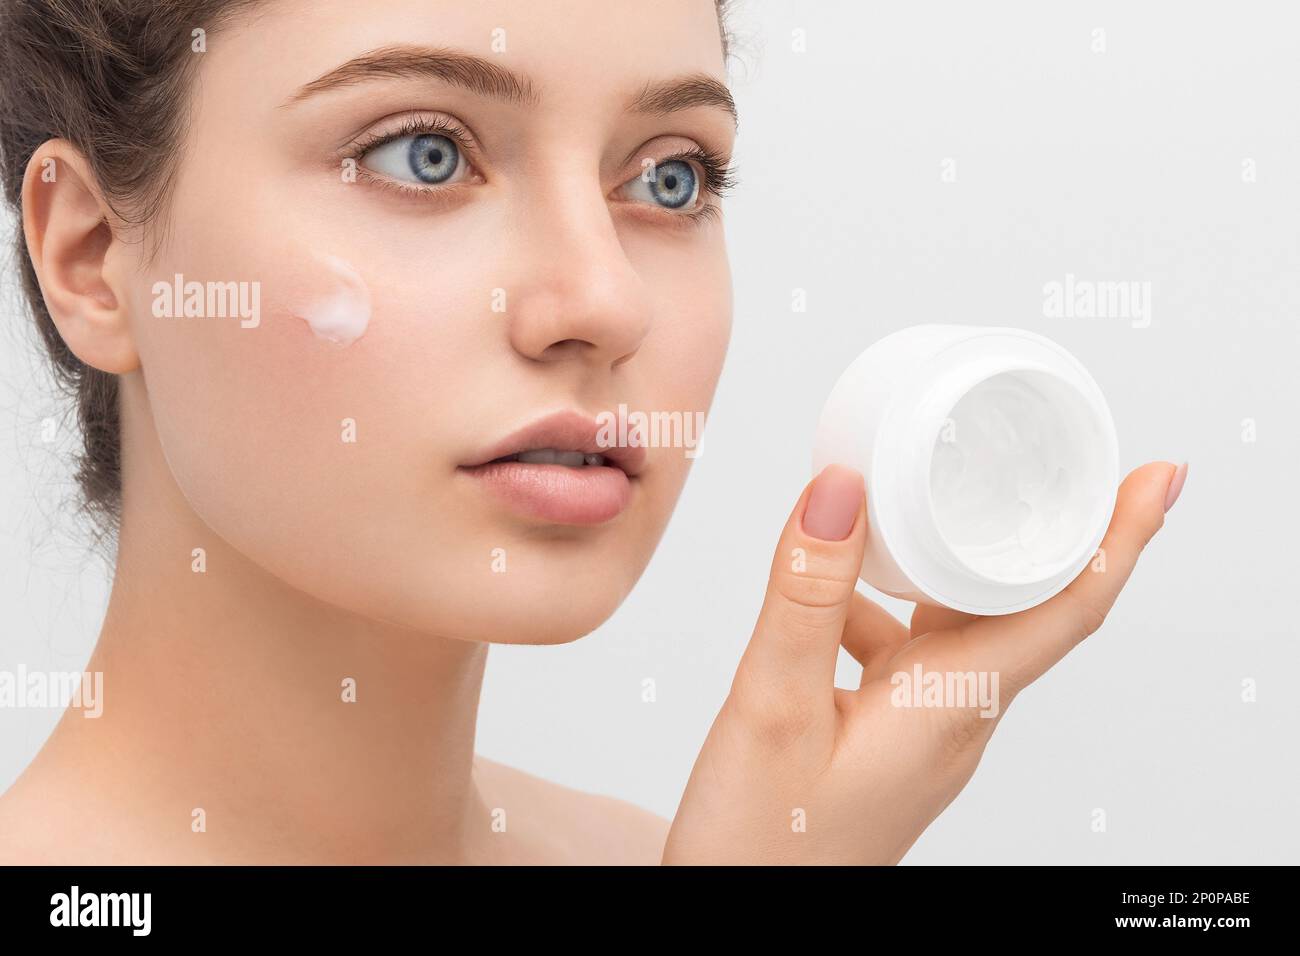 Young beautiful woman applies cream to her face, close-up. Long hair, big blue eyes and clear skin. Stock Photo